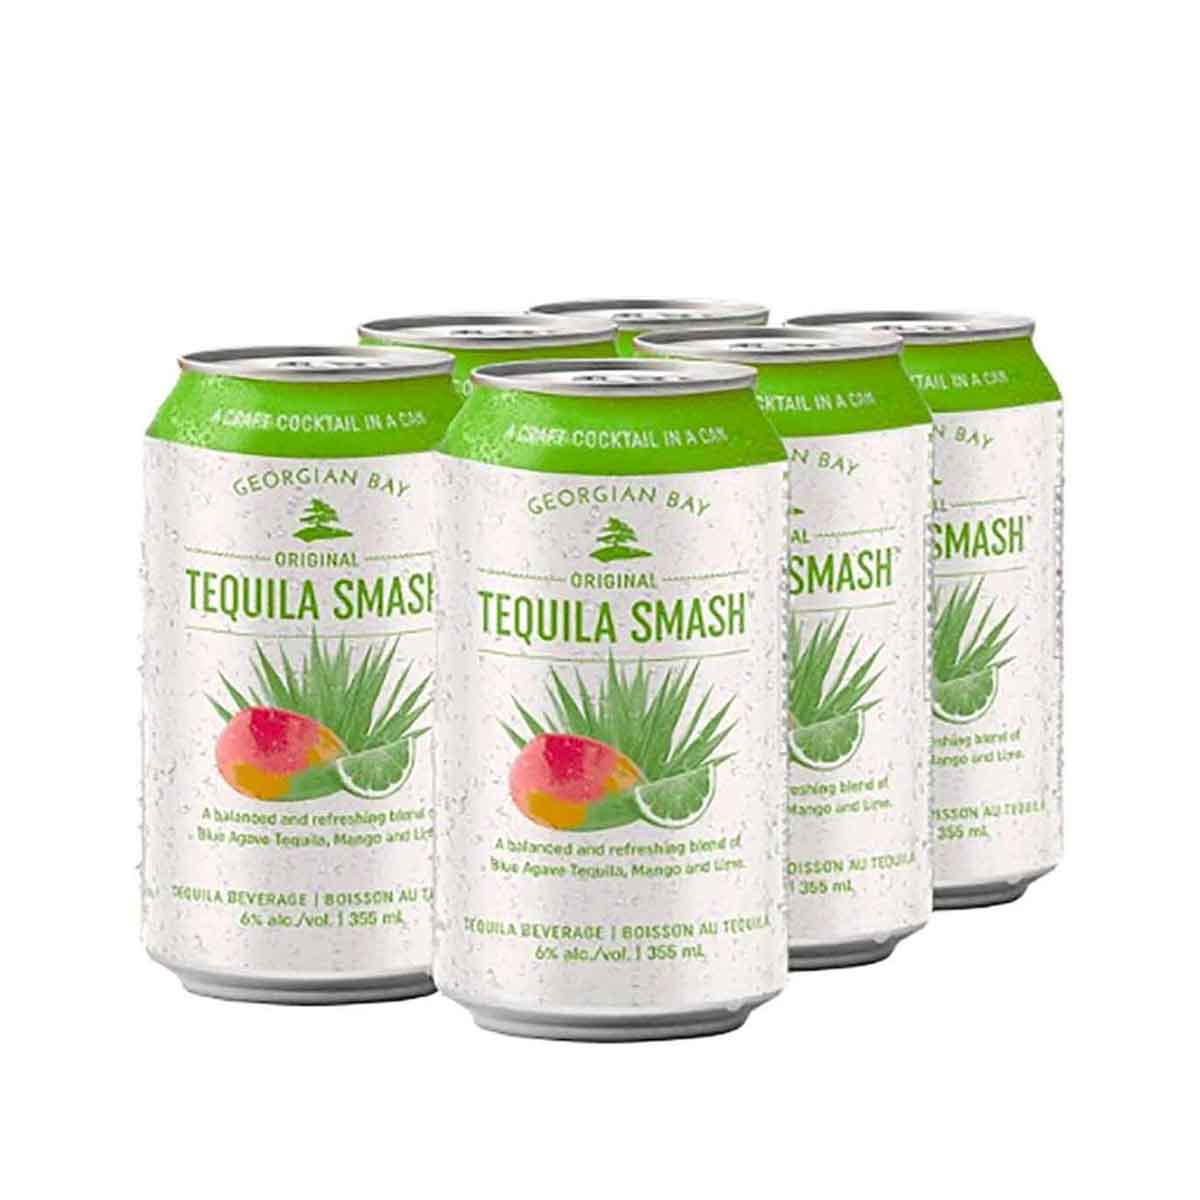 TAG Liquor Stores BC-GEORGIAN BAY TEQUILA SMASH 6 PACK CANS